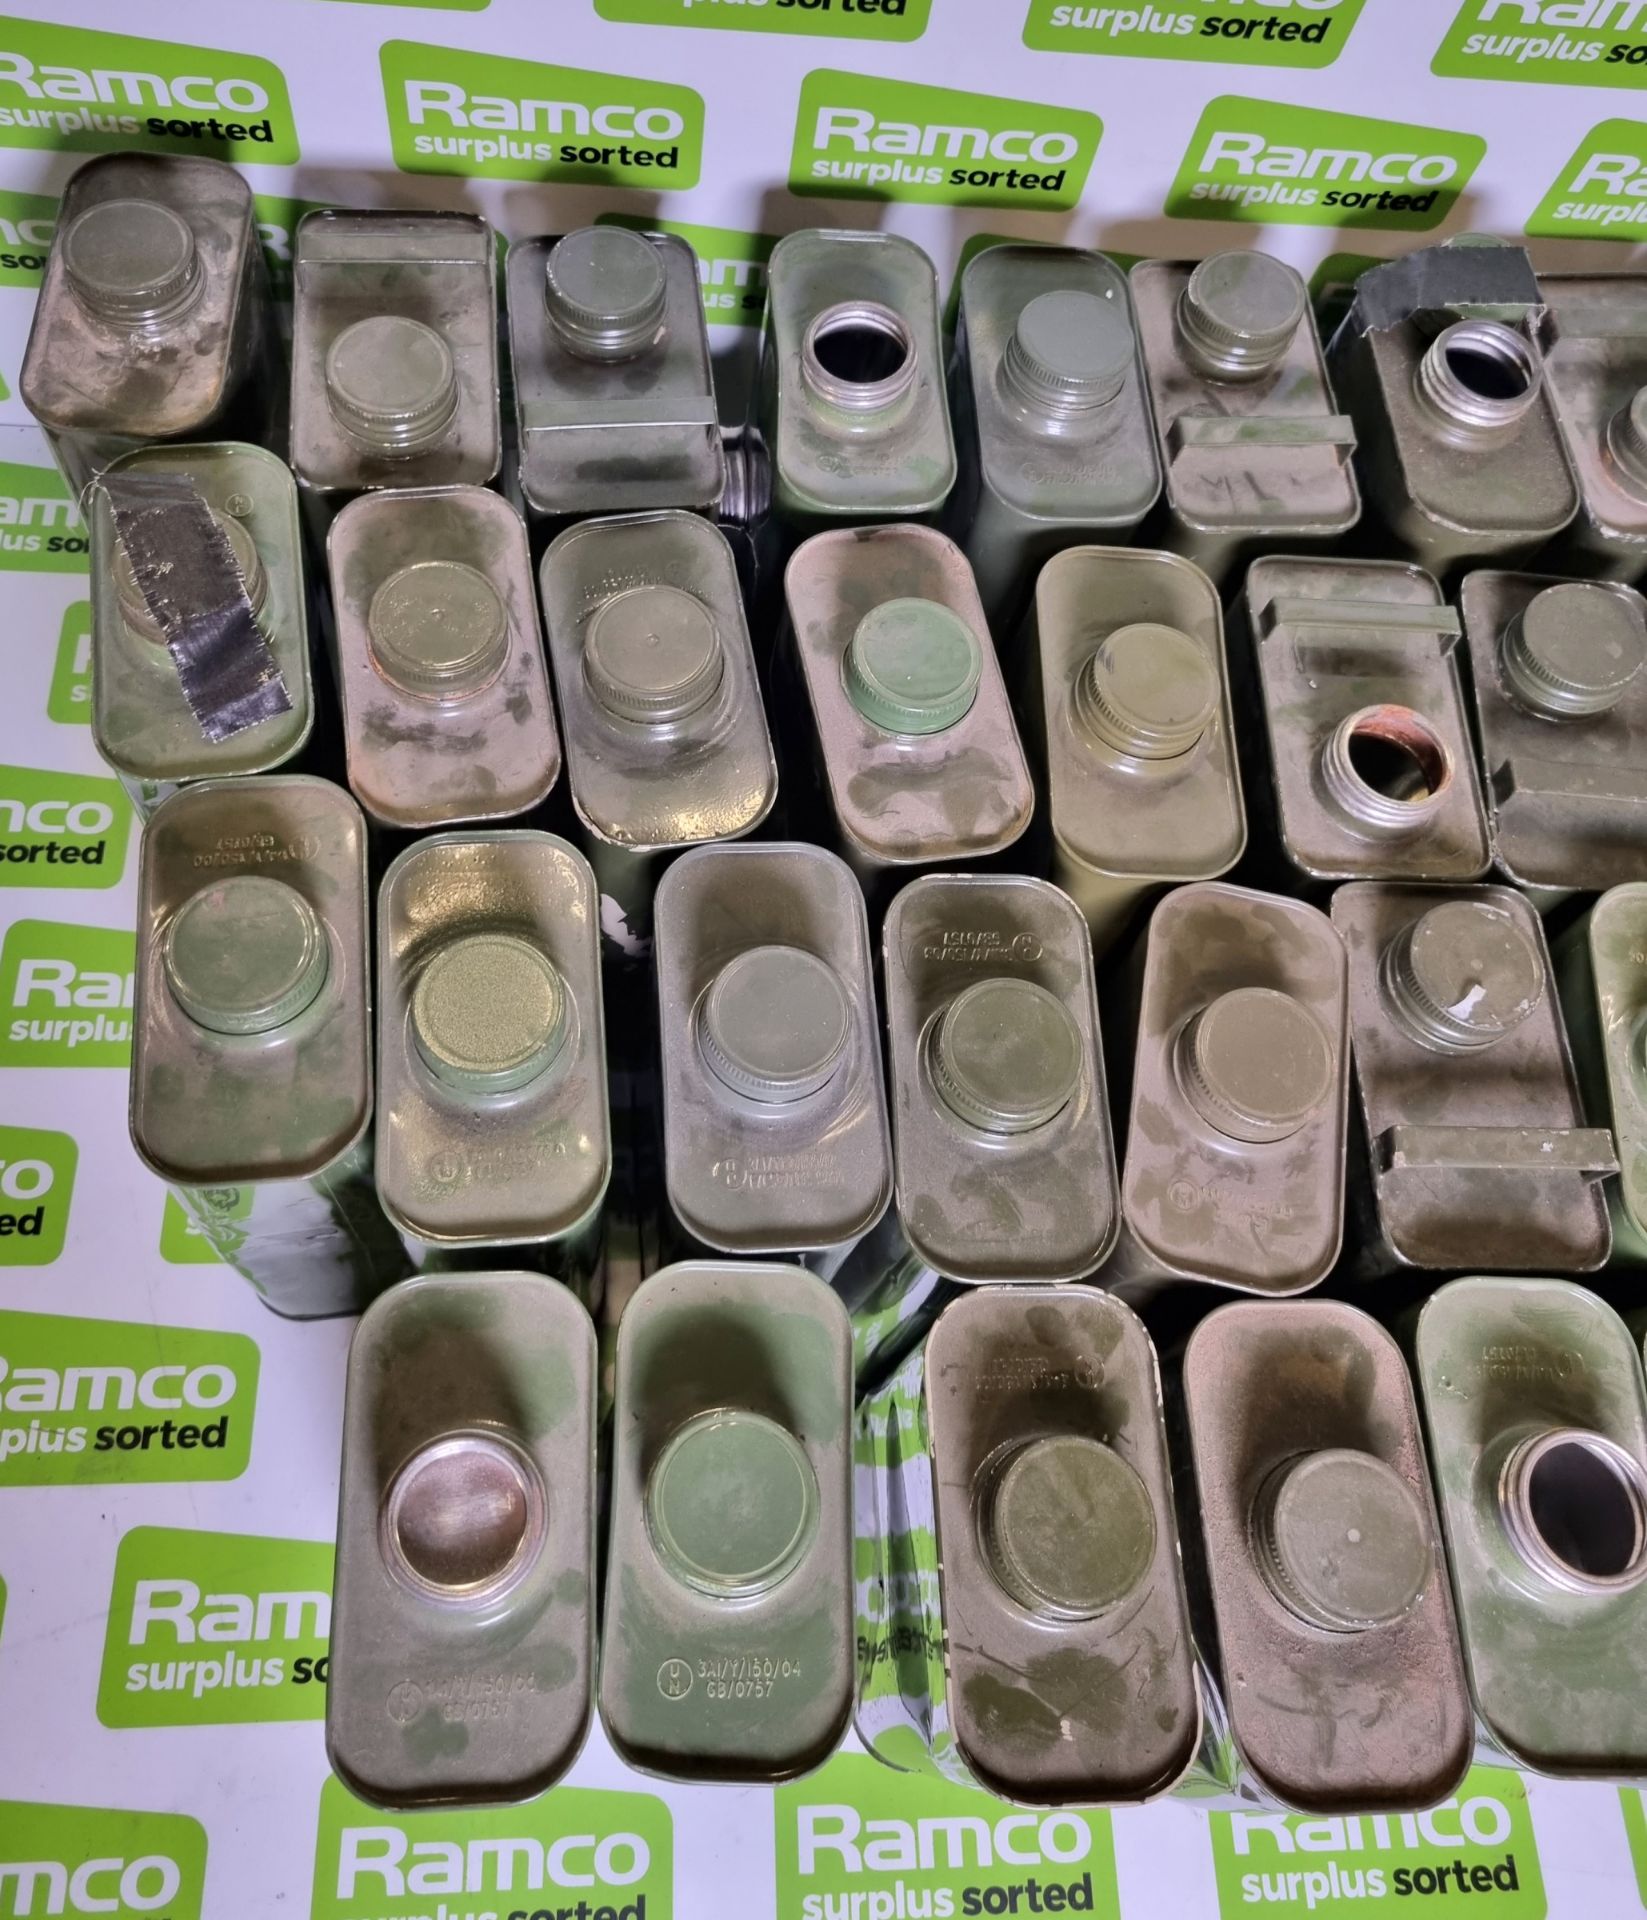 55x 1 litre screw cap containers in olive drab - Image 4 of 5